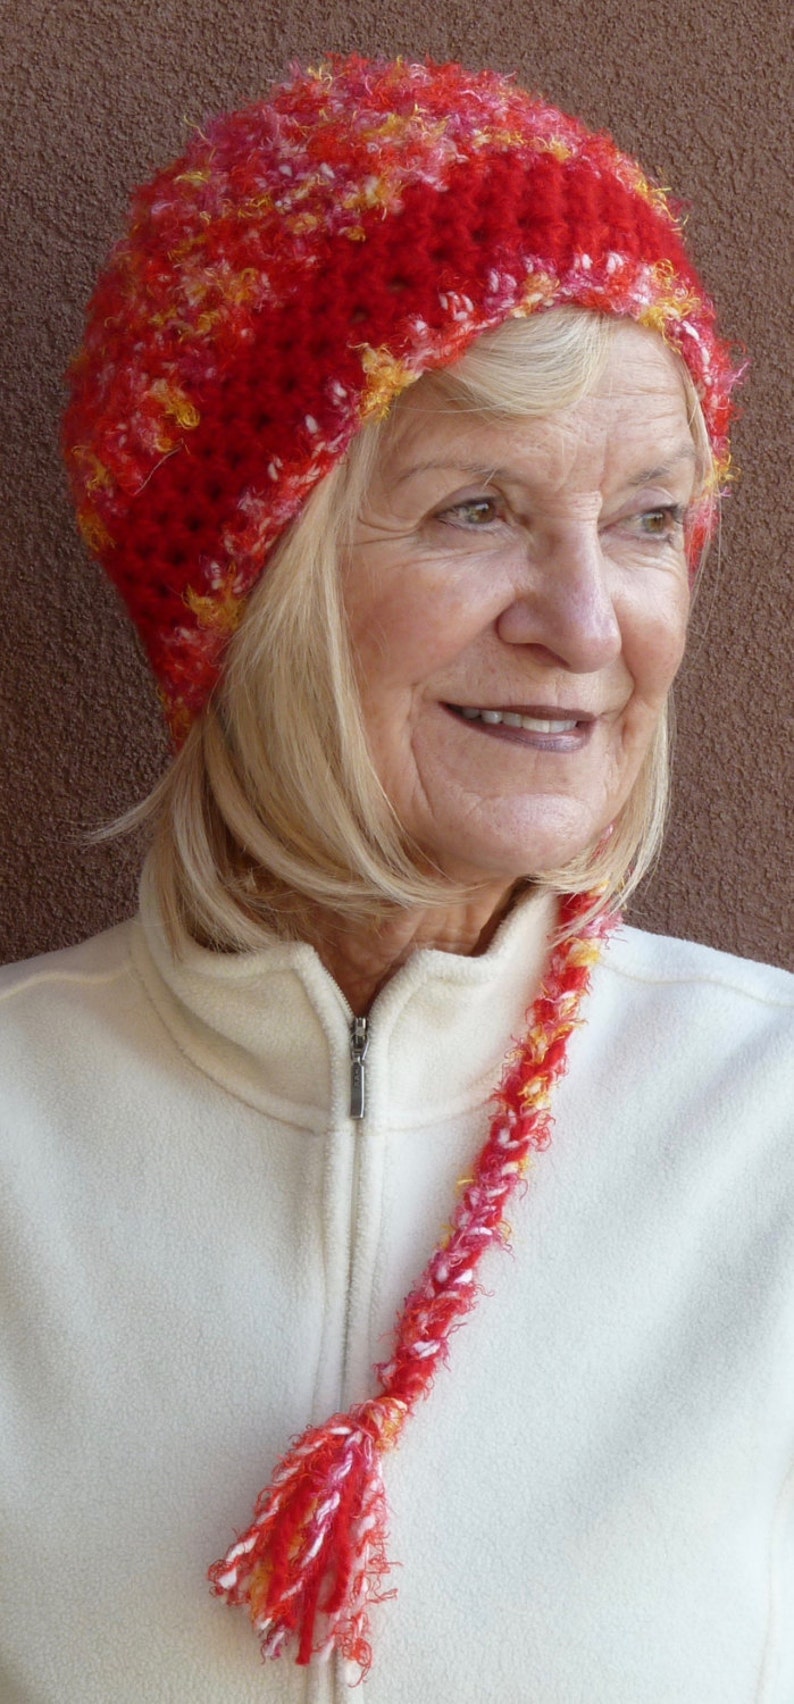 Red winter hat / crochet ponytail hat / winter hat / handmade crochet hat / unique and one of a kind hat / red winter hat with a tail image 1